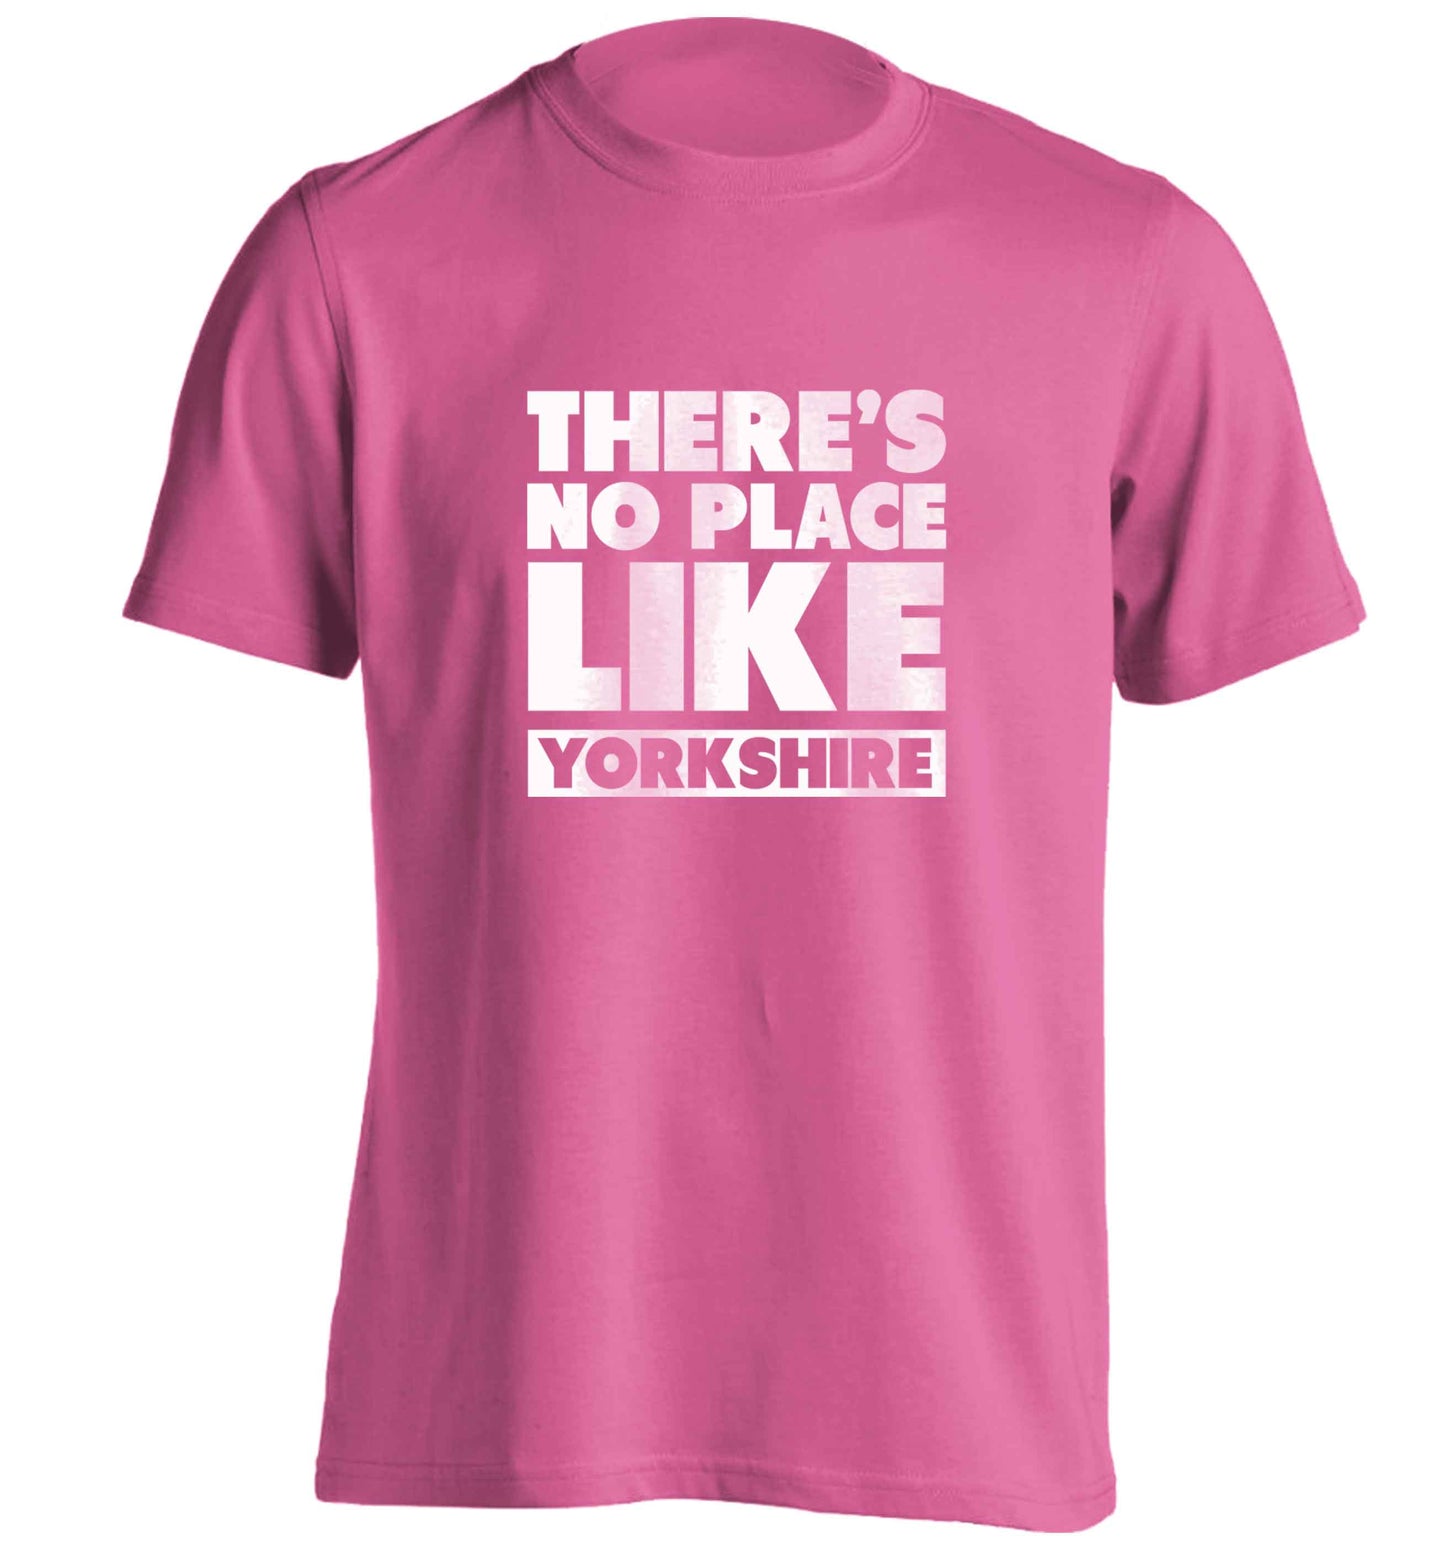 There's no place like Yorkshire adults unisex pink Tshirt 2XL